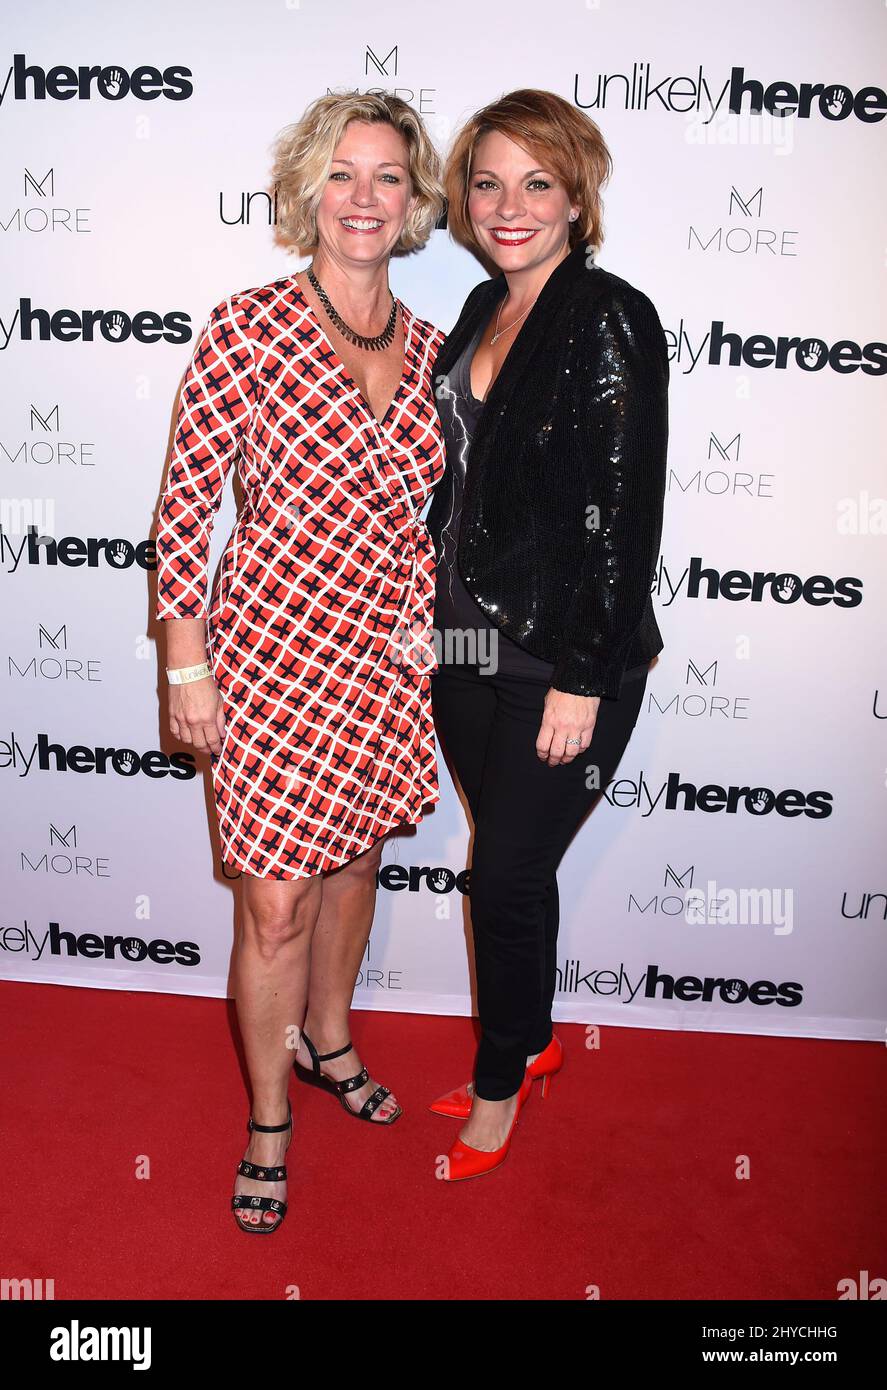 Kelli Carpenter and Anne Steele attending Unlikely Heroes' Nights of Freedom, presented by MORE Company, held at the City Winery in Nashville, Tennessee Stock Photo